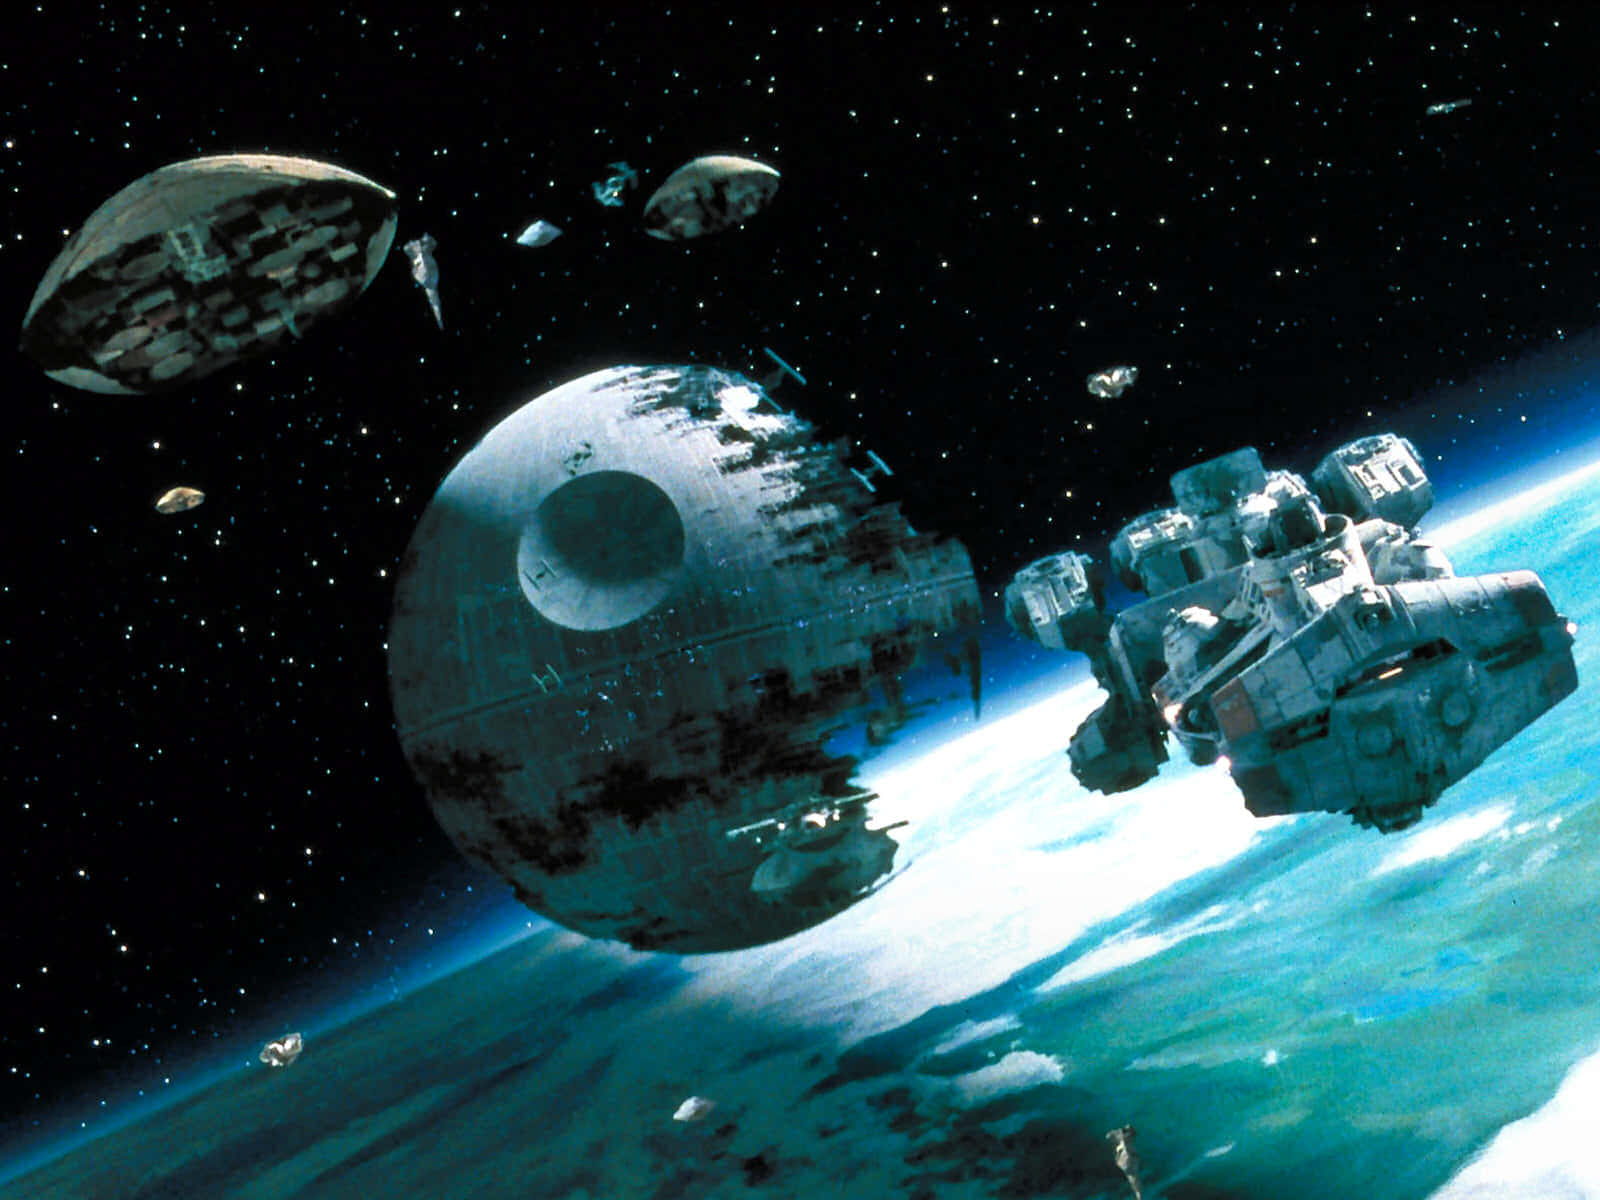 The infamous, planet-destroying, Death Star II with its enhanced capabilities. Wallpaper